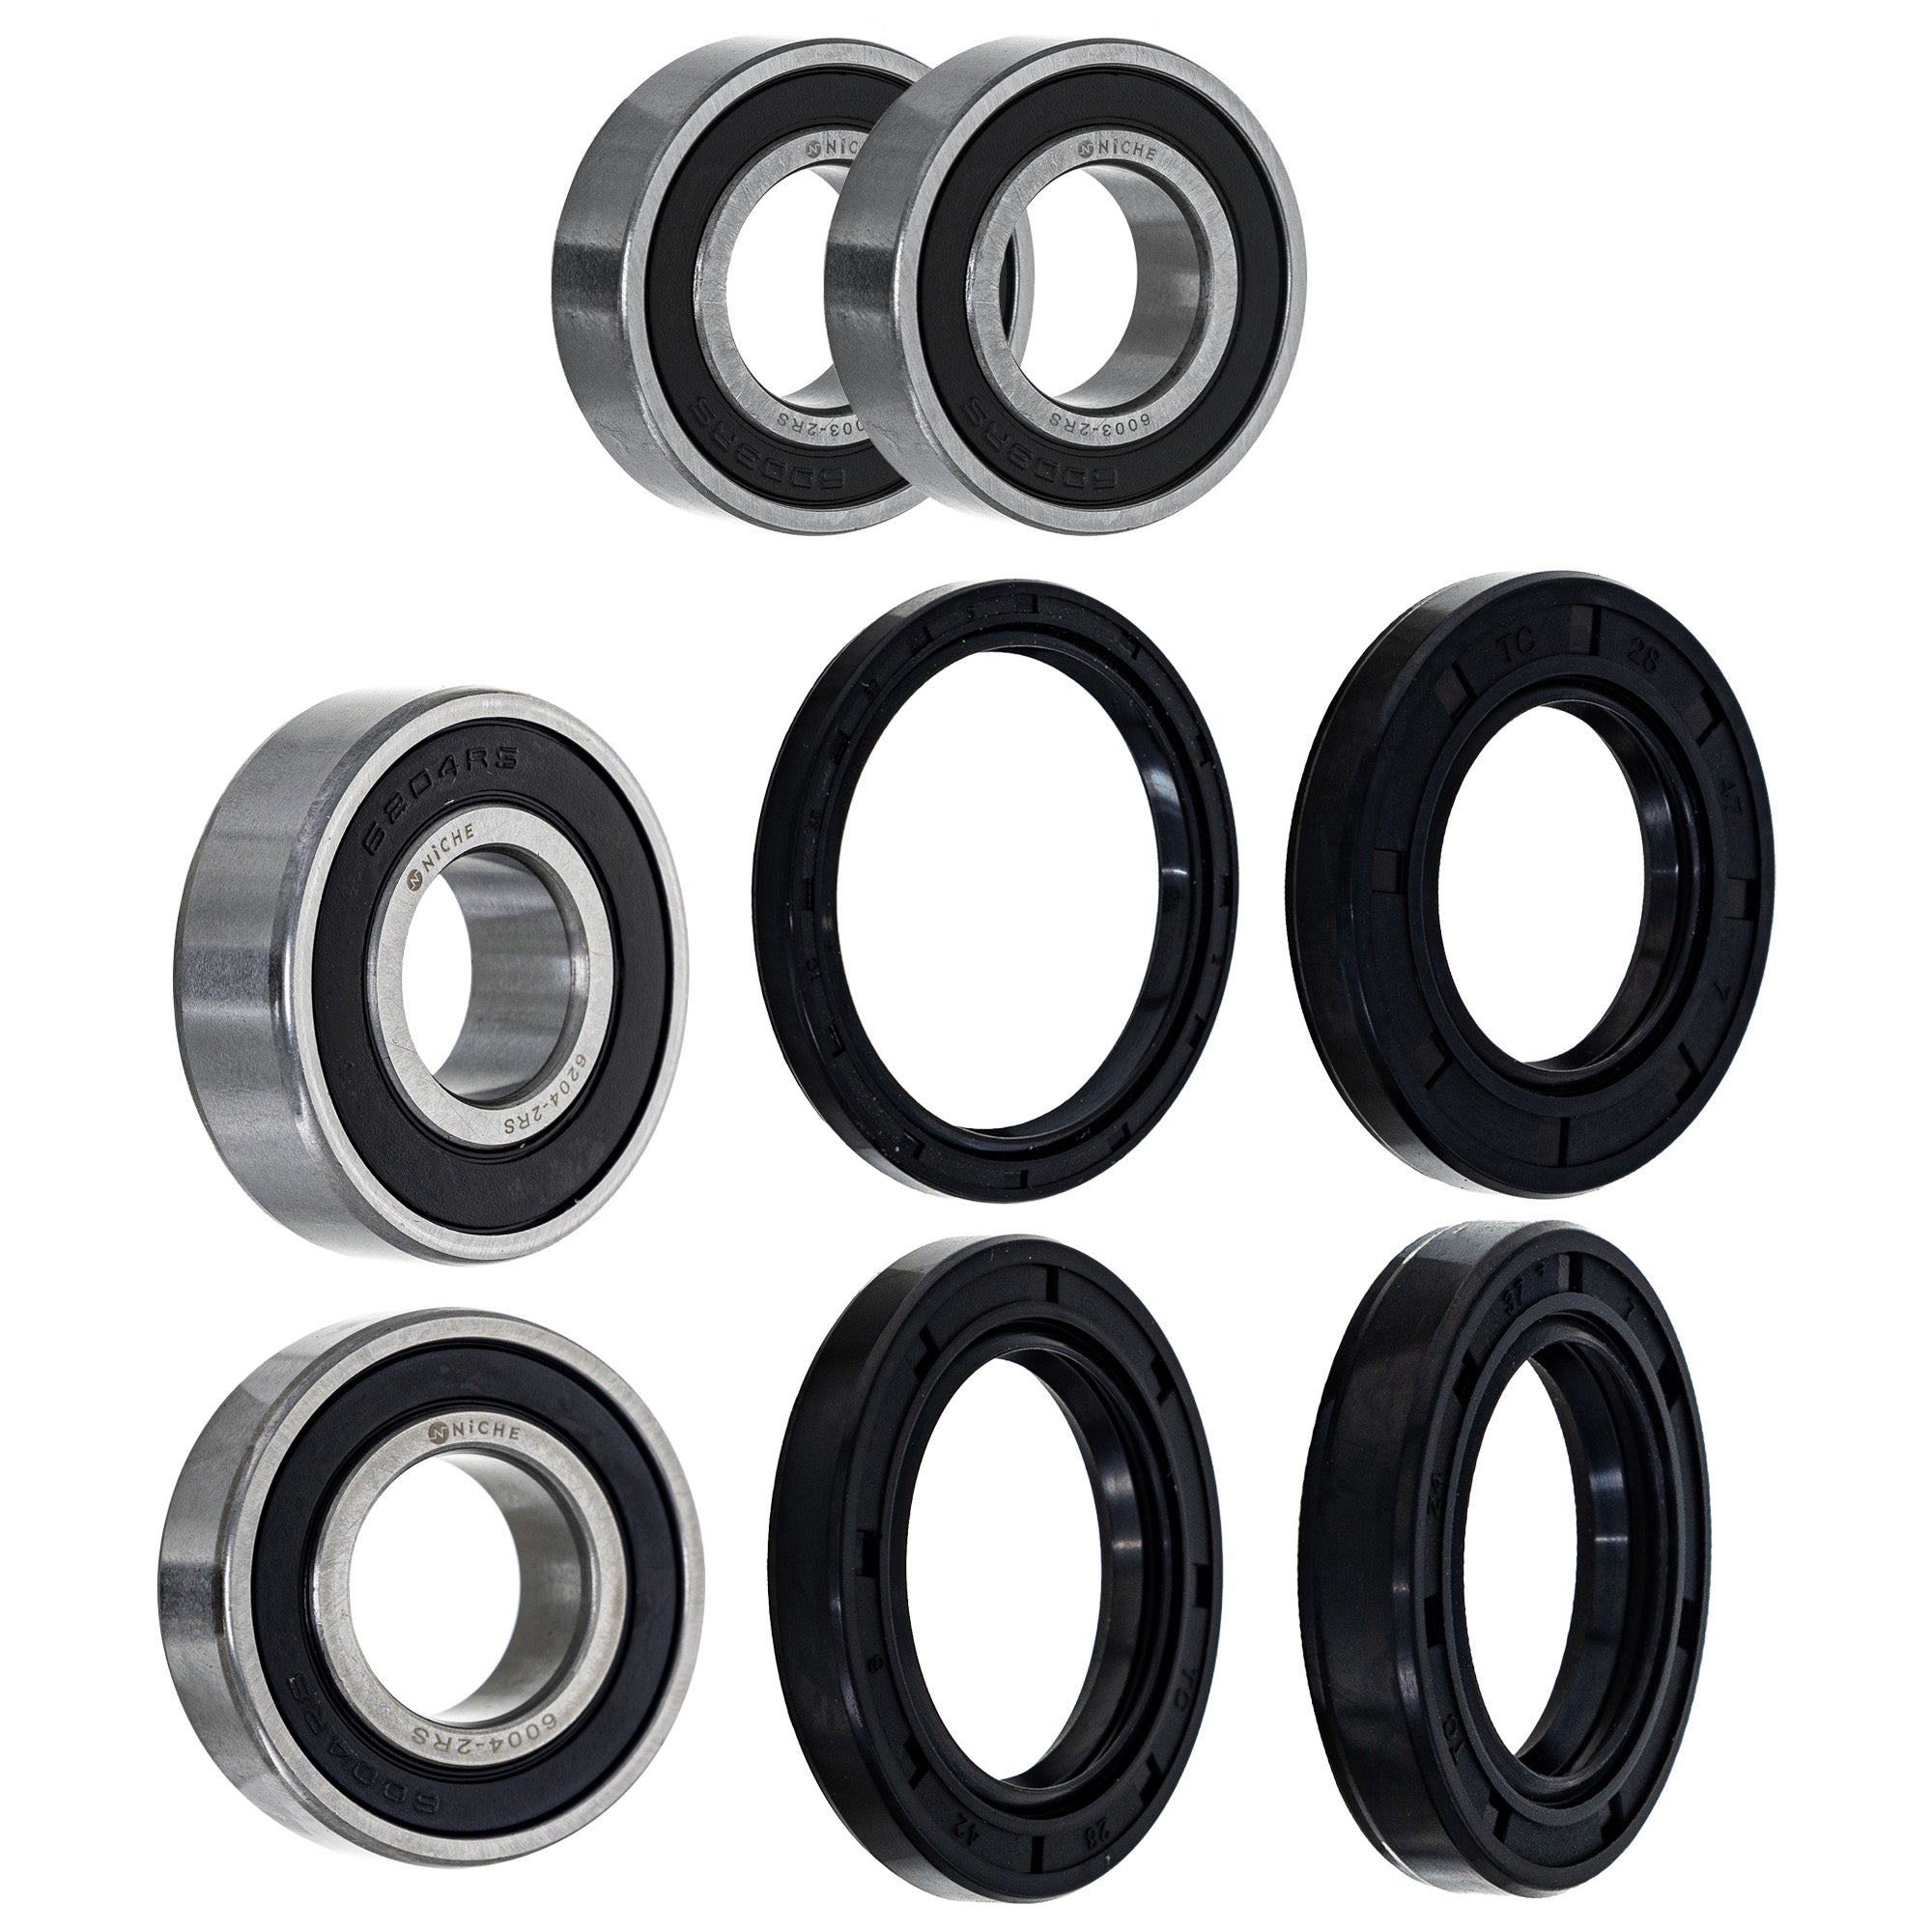 Wheel Bearing Seal Kit for zOTHER Ref No XR650R NICHE MK1008758